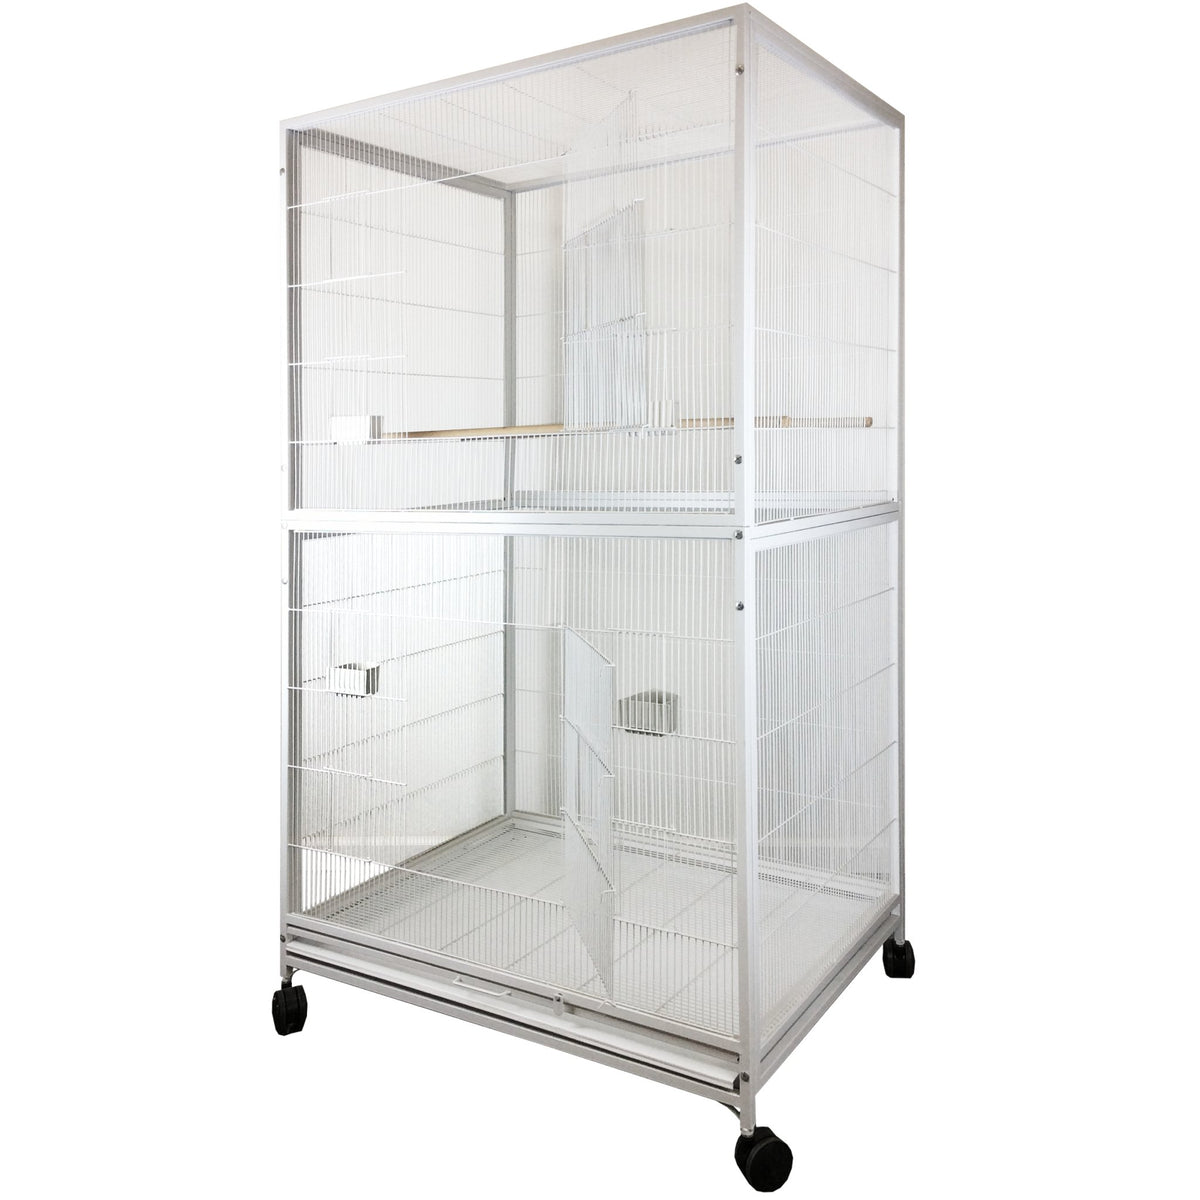 A & E Cage Co - Extra Large Flight Cage, 40"x30"x72" - Quill & Roost